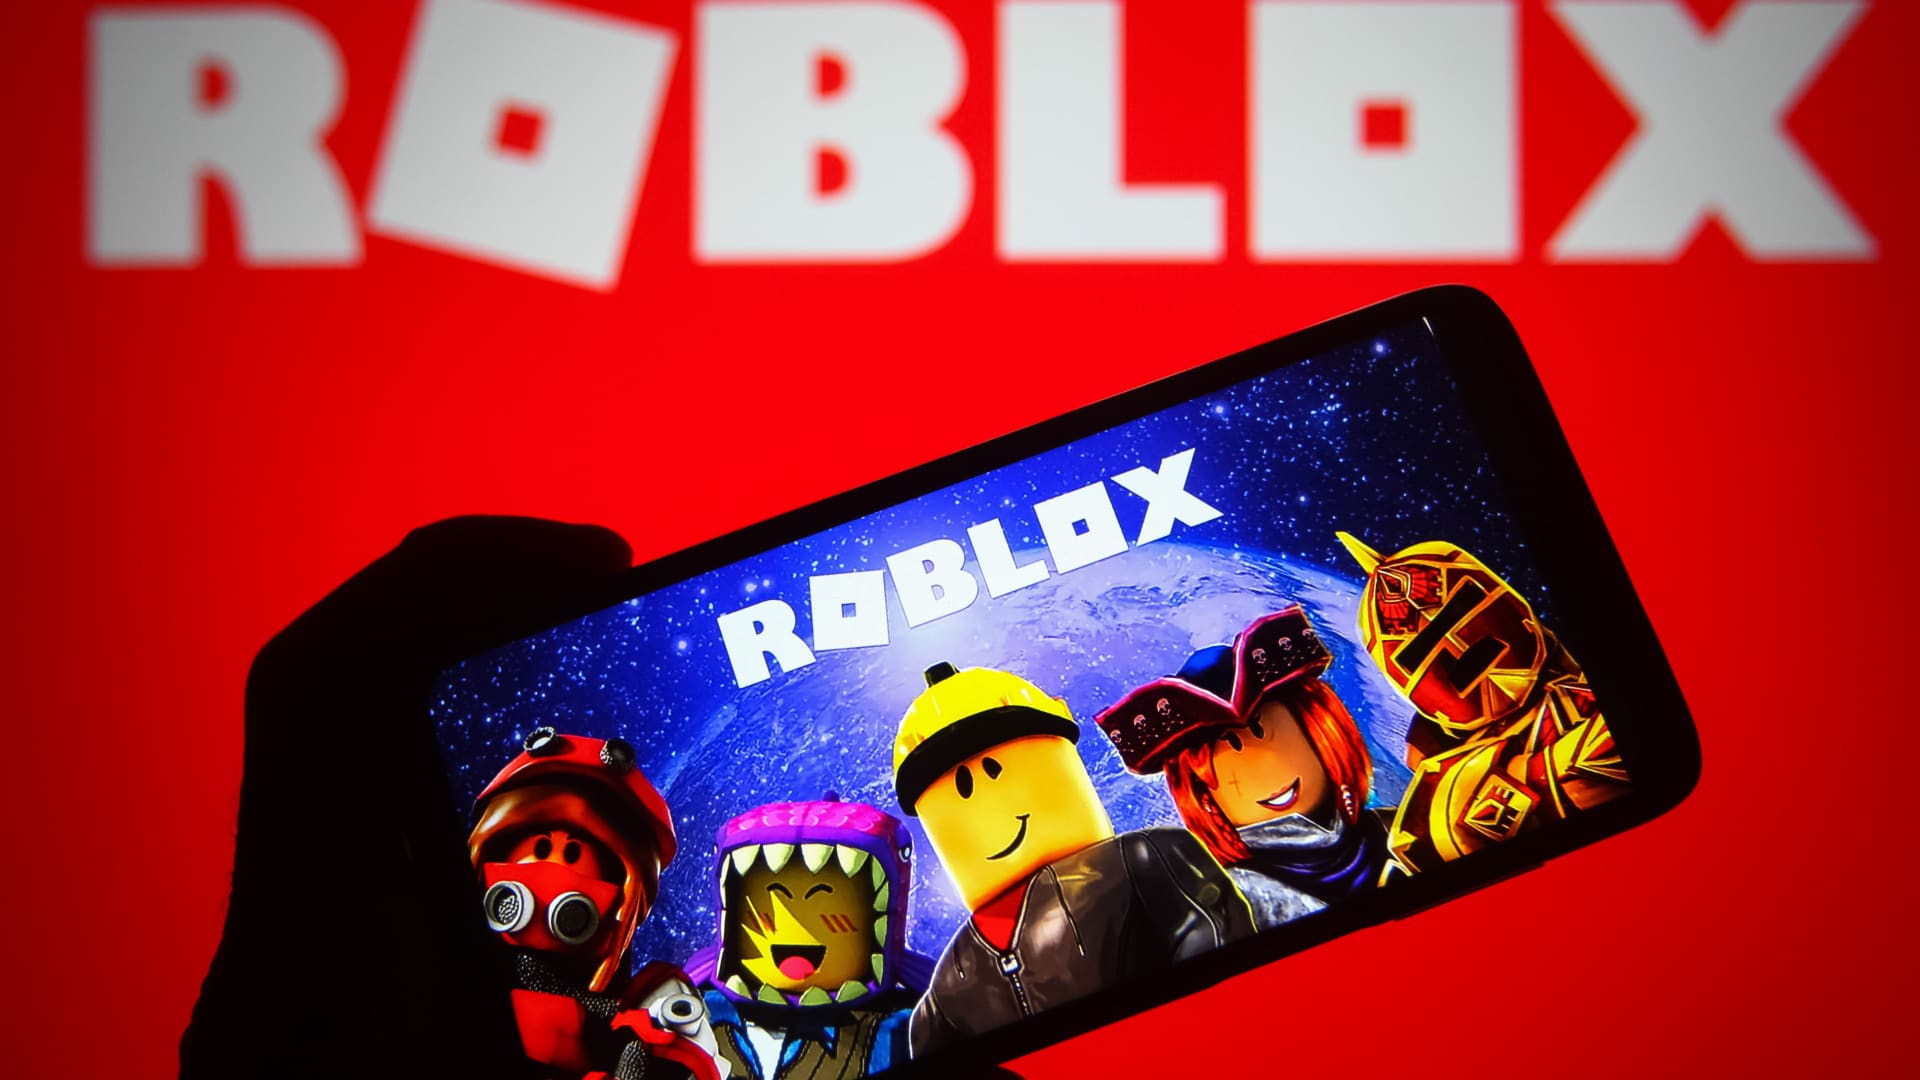 Roblox - Roblox Reports First Quarter 2023 Financial Results